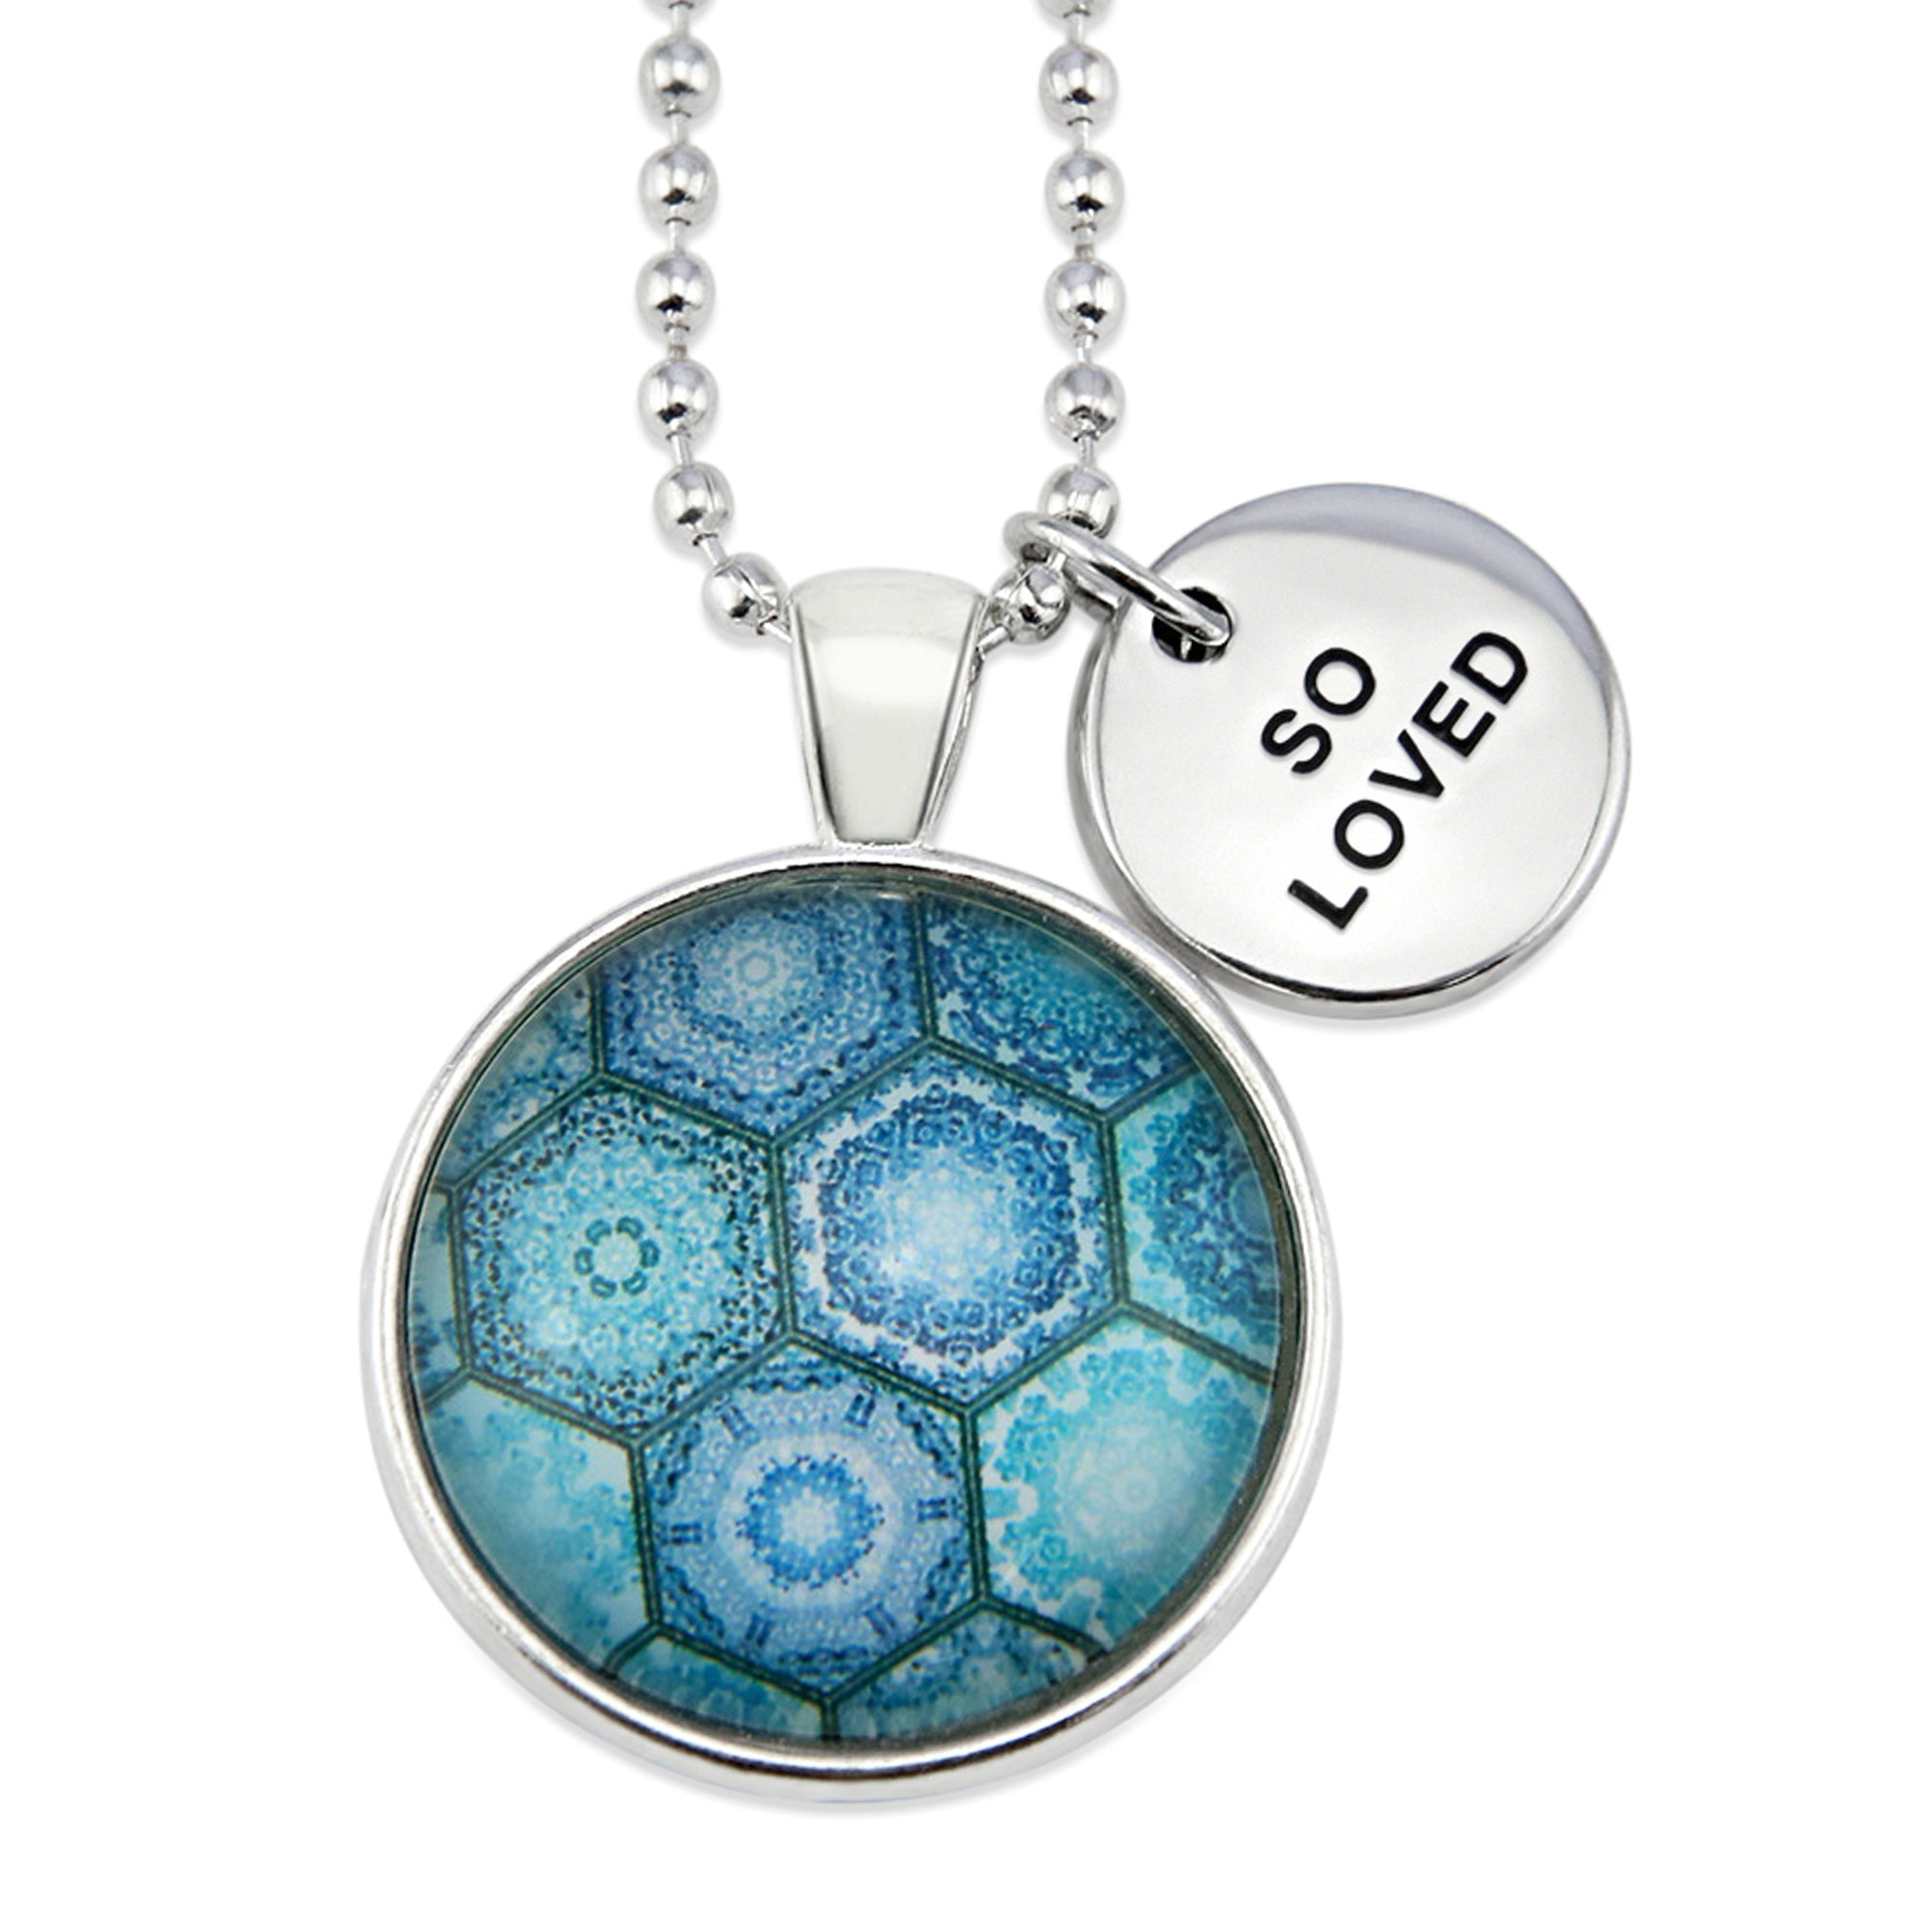 Teal hexagon print pendant necklace in bright silver with so loved charm. 